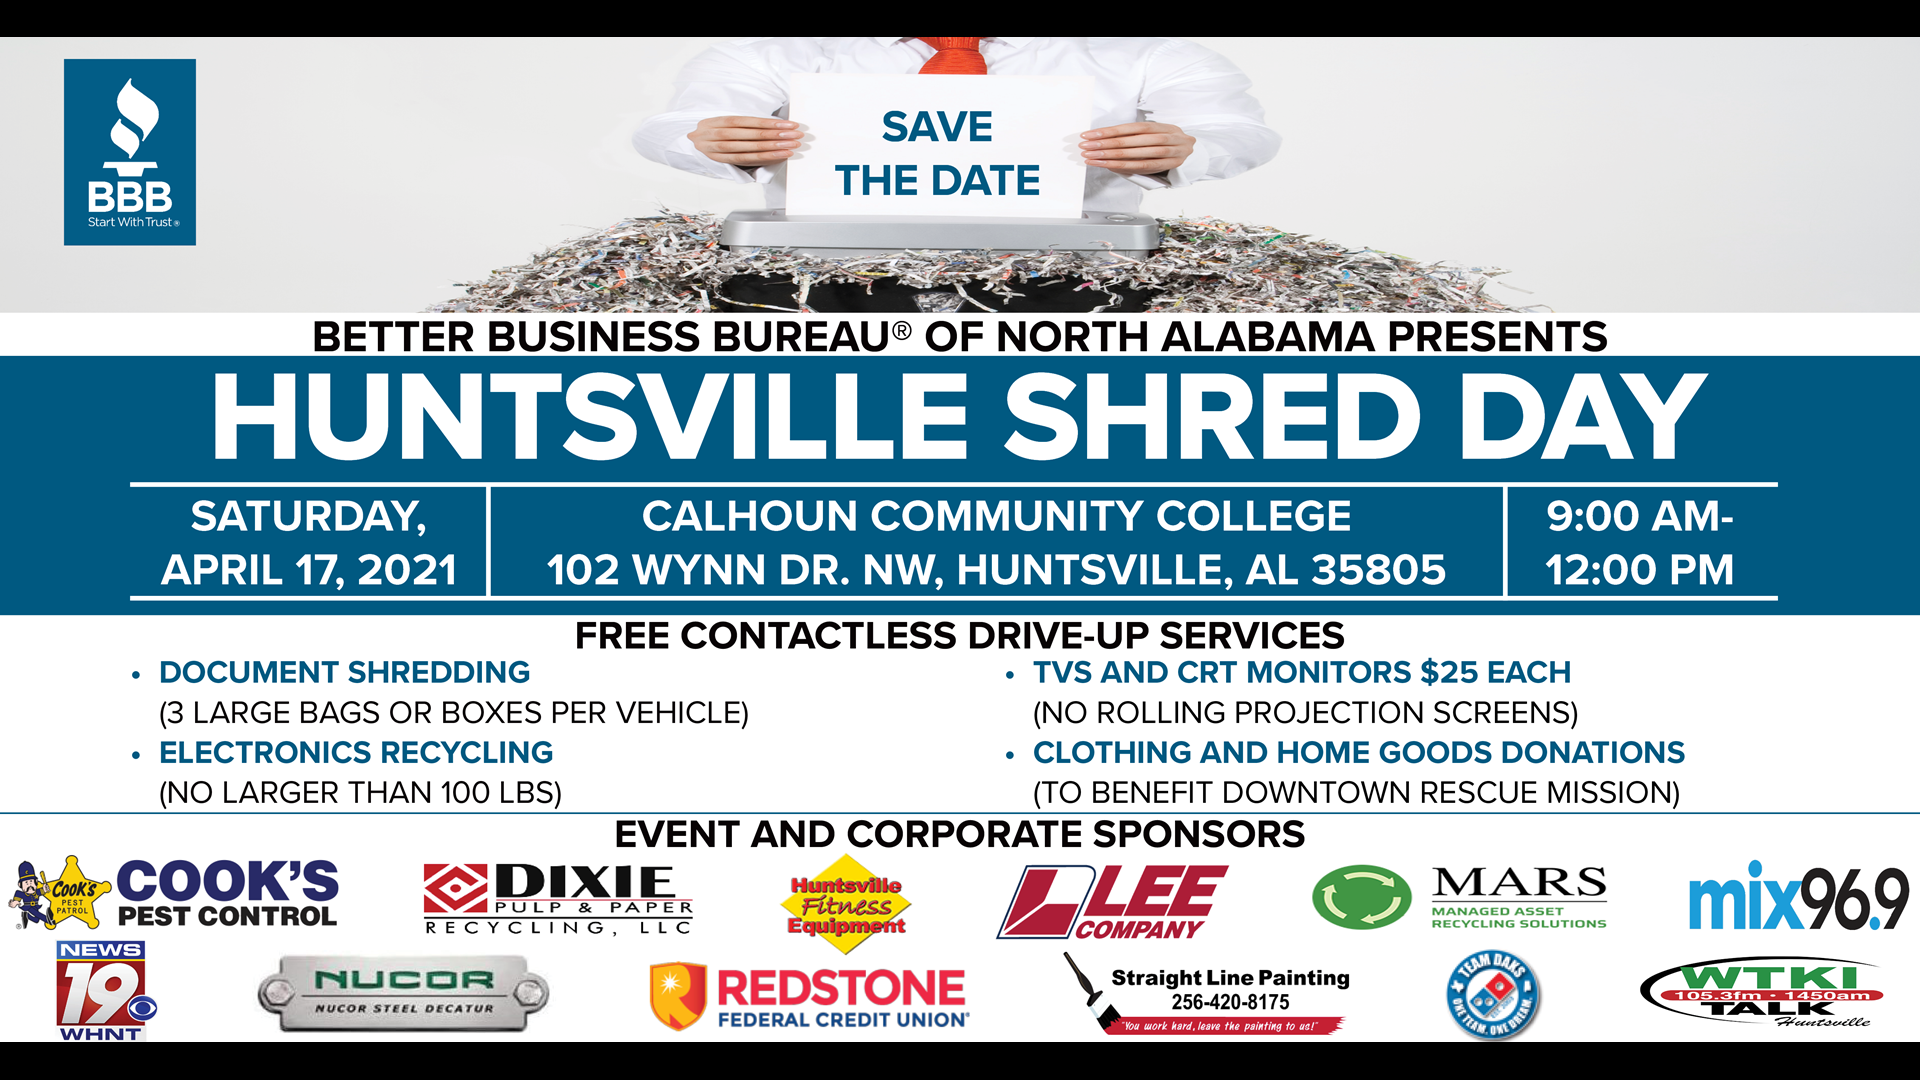 BBB of North Alabama hosting a Shred Day on Saturday, April 17